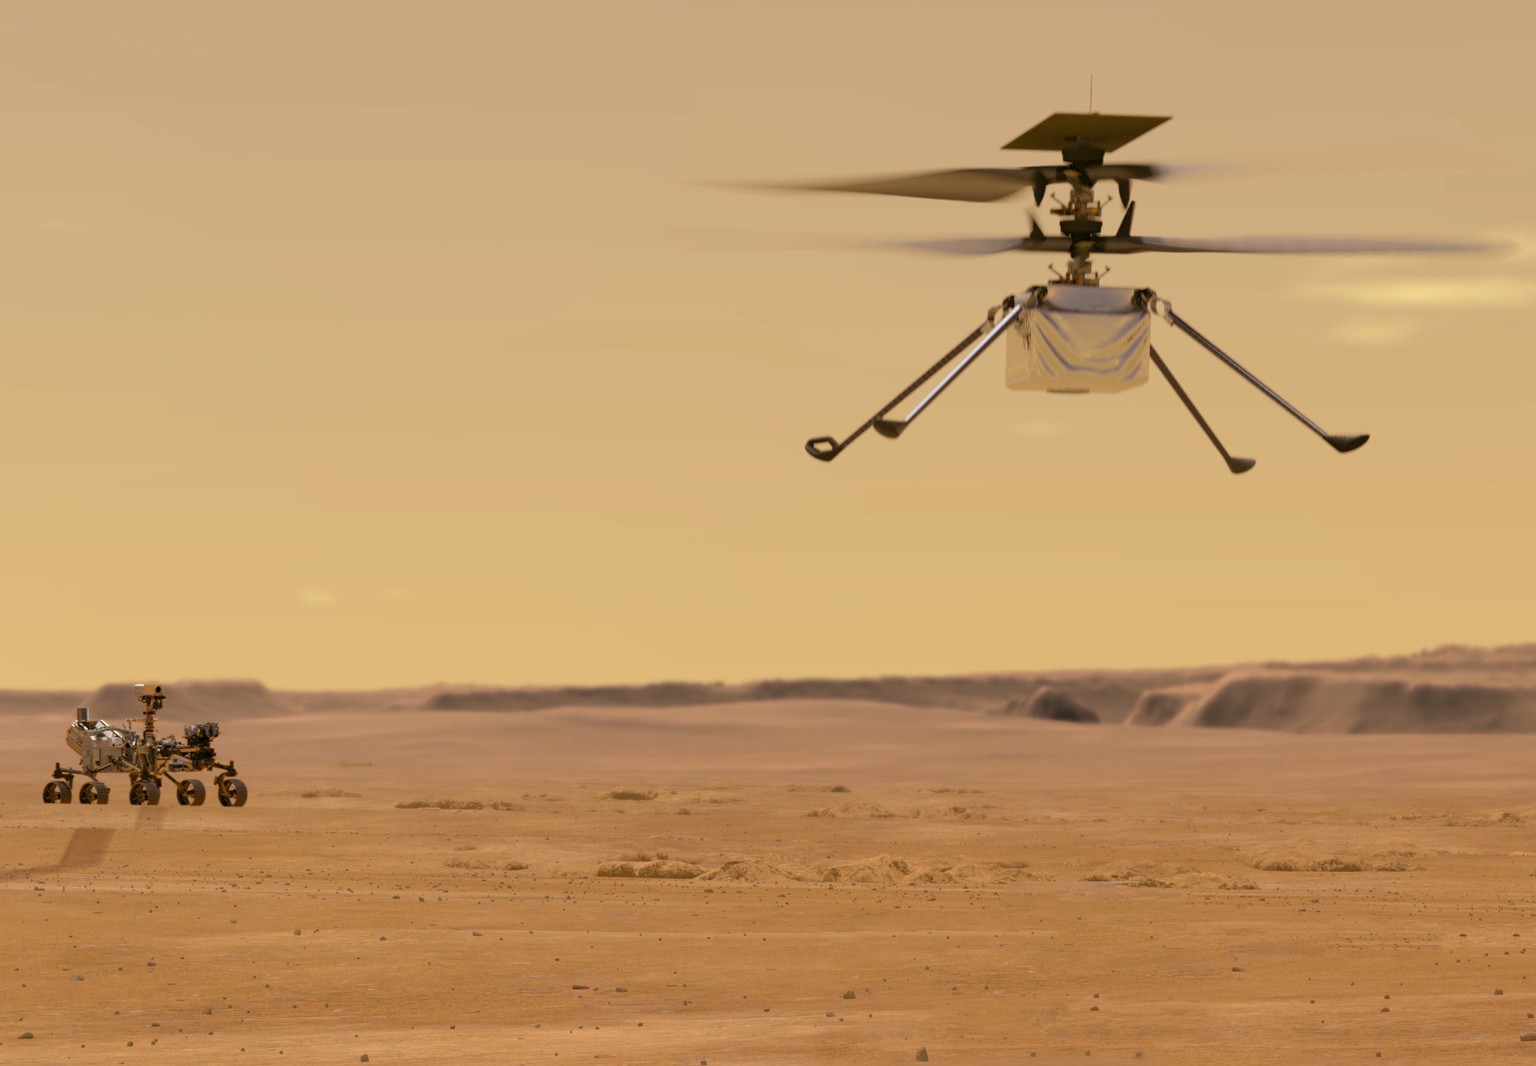 This illustration made available by NASA depicts the Ingenuity helicopter on Mars after launching from the Perseverance rover, background left. It will be the first aircraft to attempt controlled flig ...